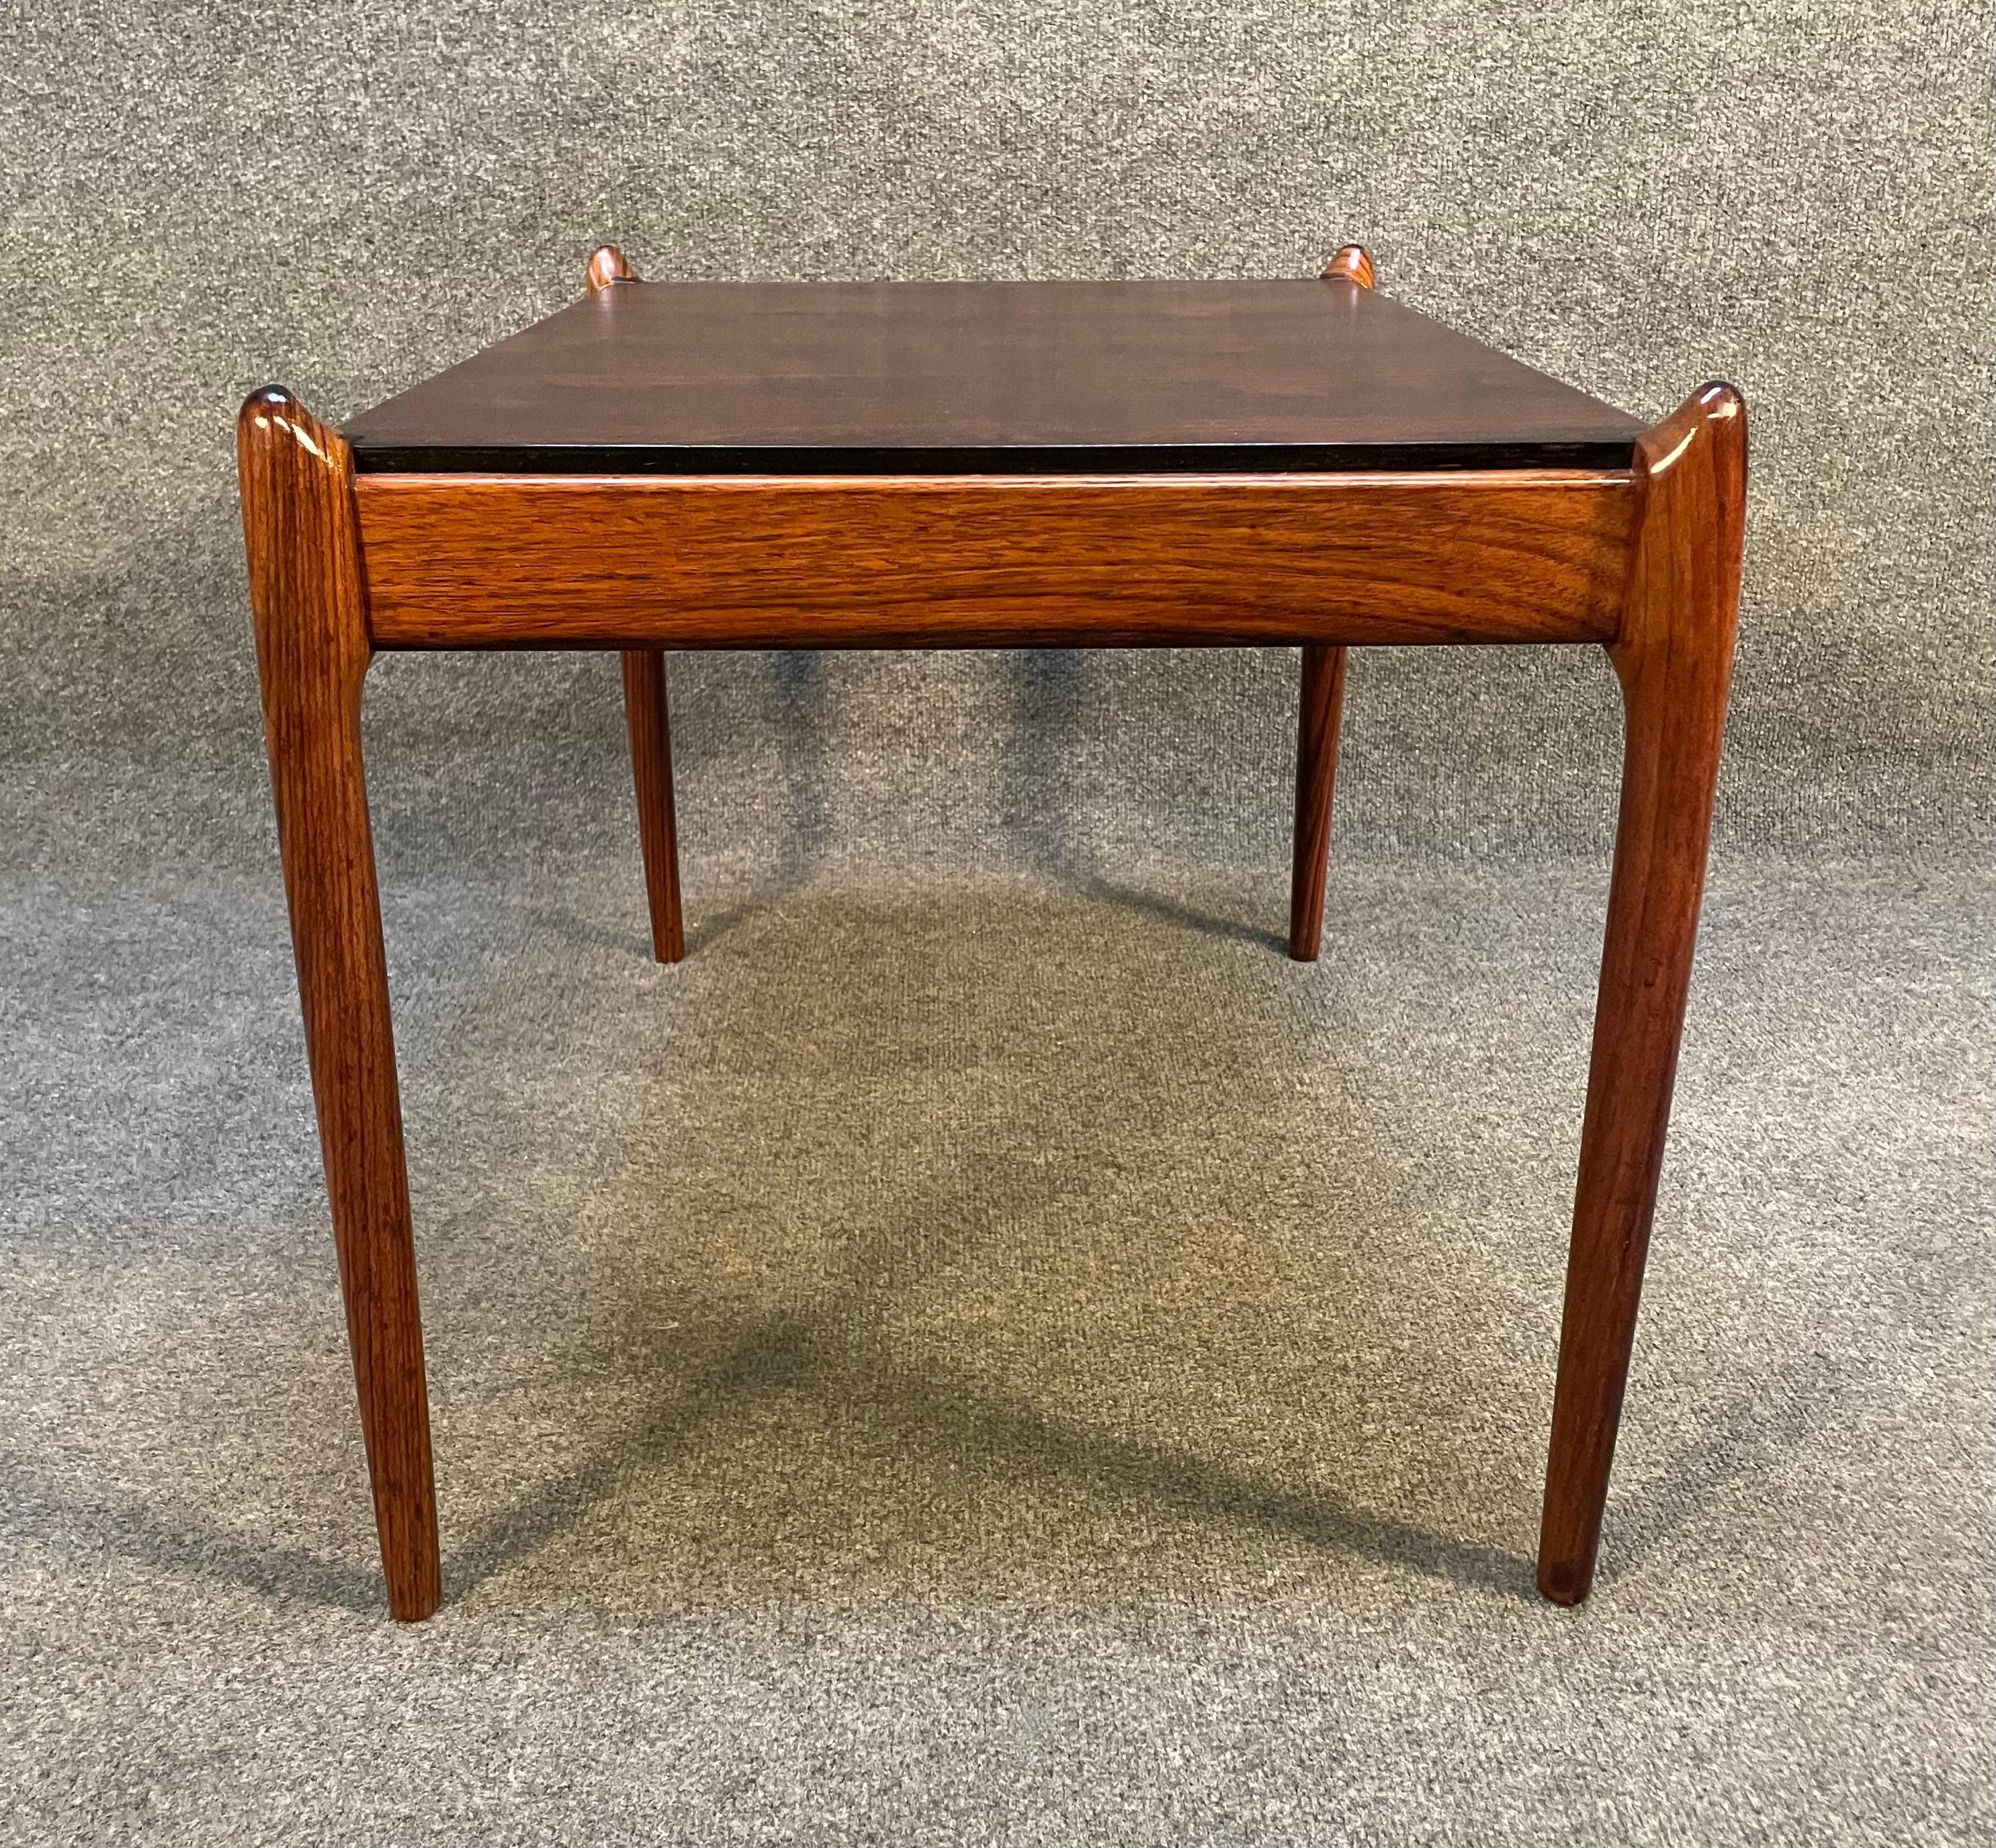 Here is a beautiful and rare end table in rosewood designed by N.Ø Moller and manufactured by J.L. Moller in Denmark isn the 1960's.
This exquisite small table, recently imported from Europe to California before its refinishing, features a vibrant